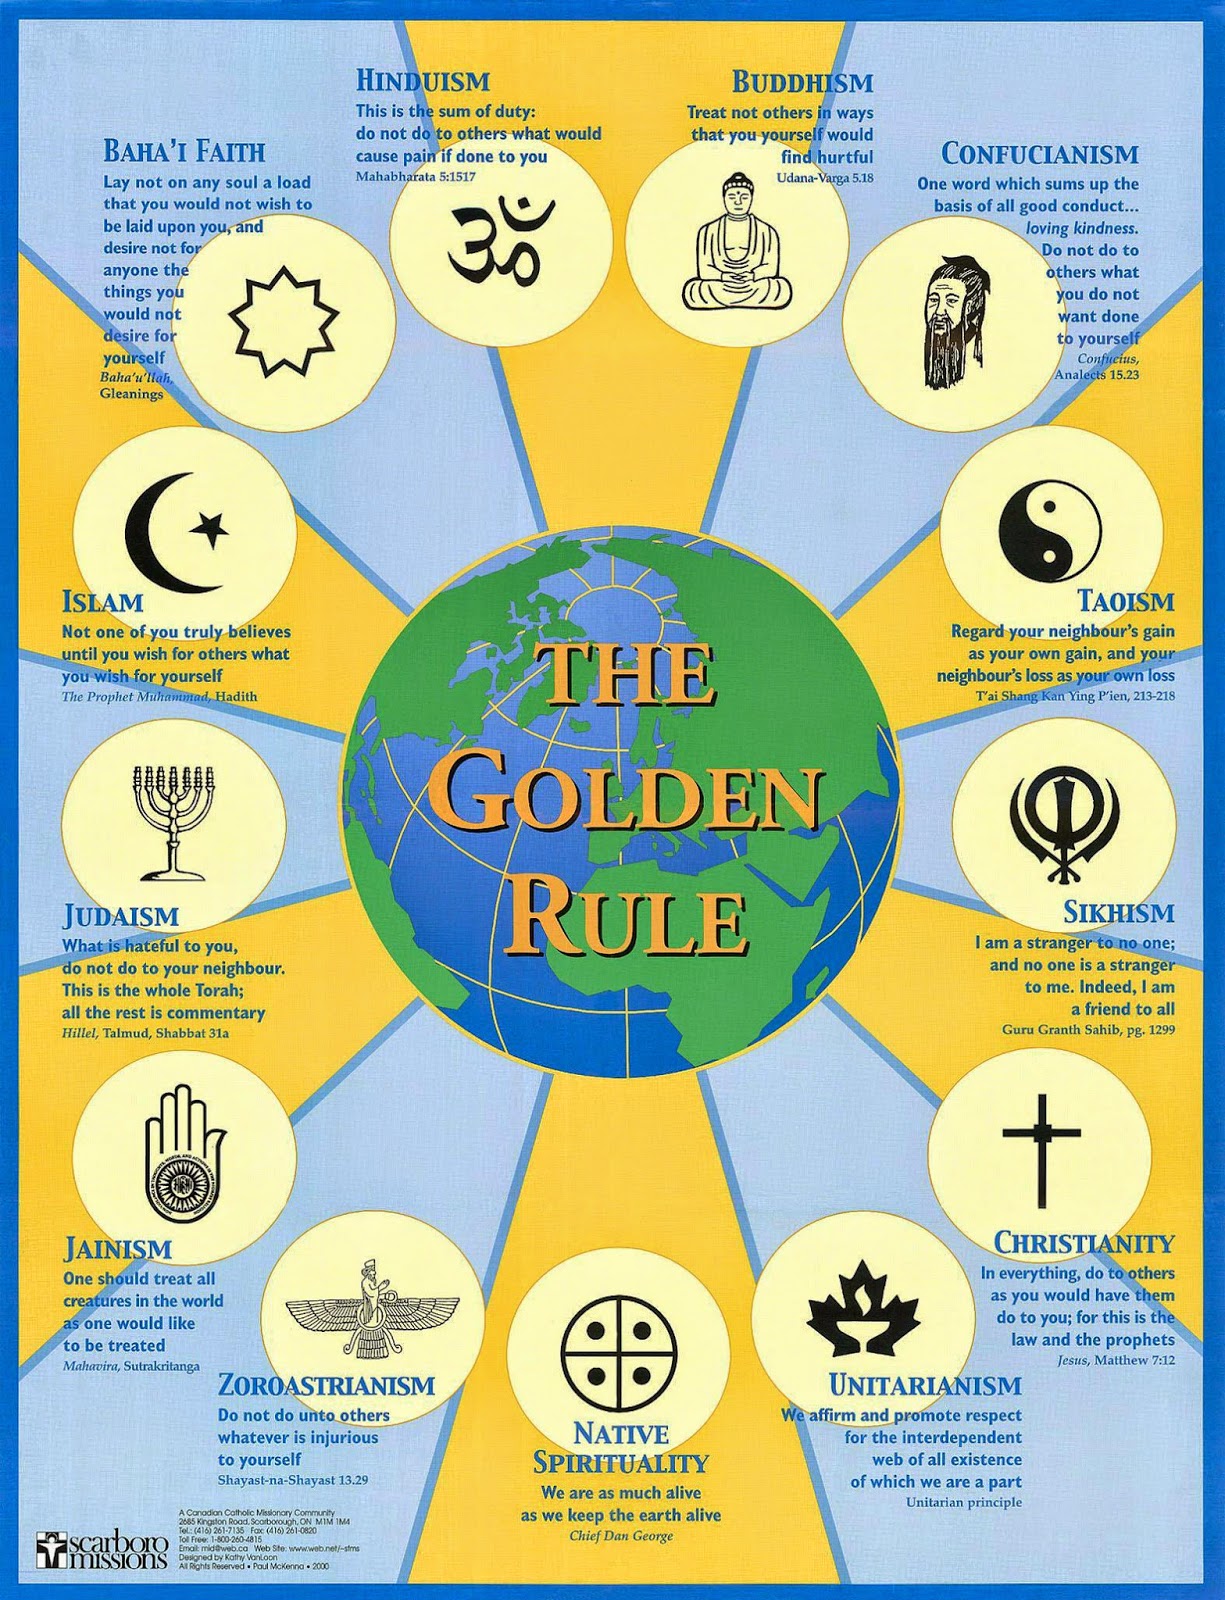 The Common Foundations of Religions and Theology - The Golden Rule